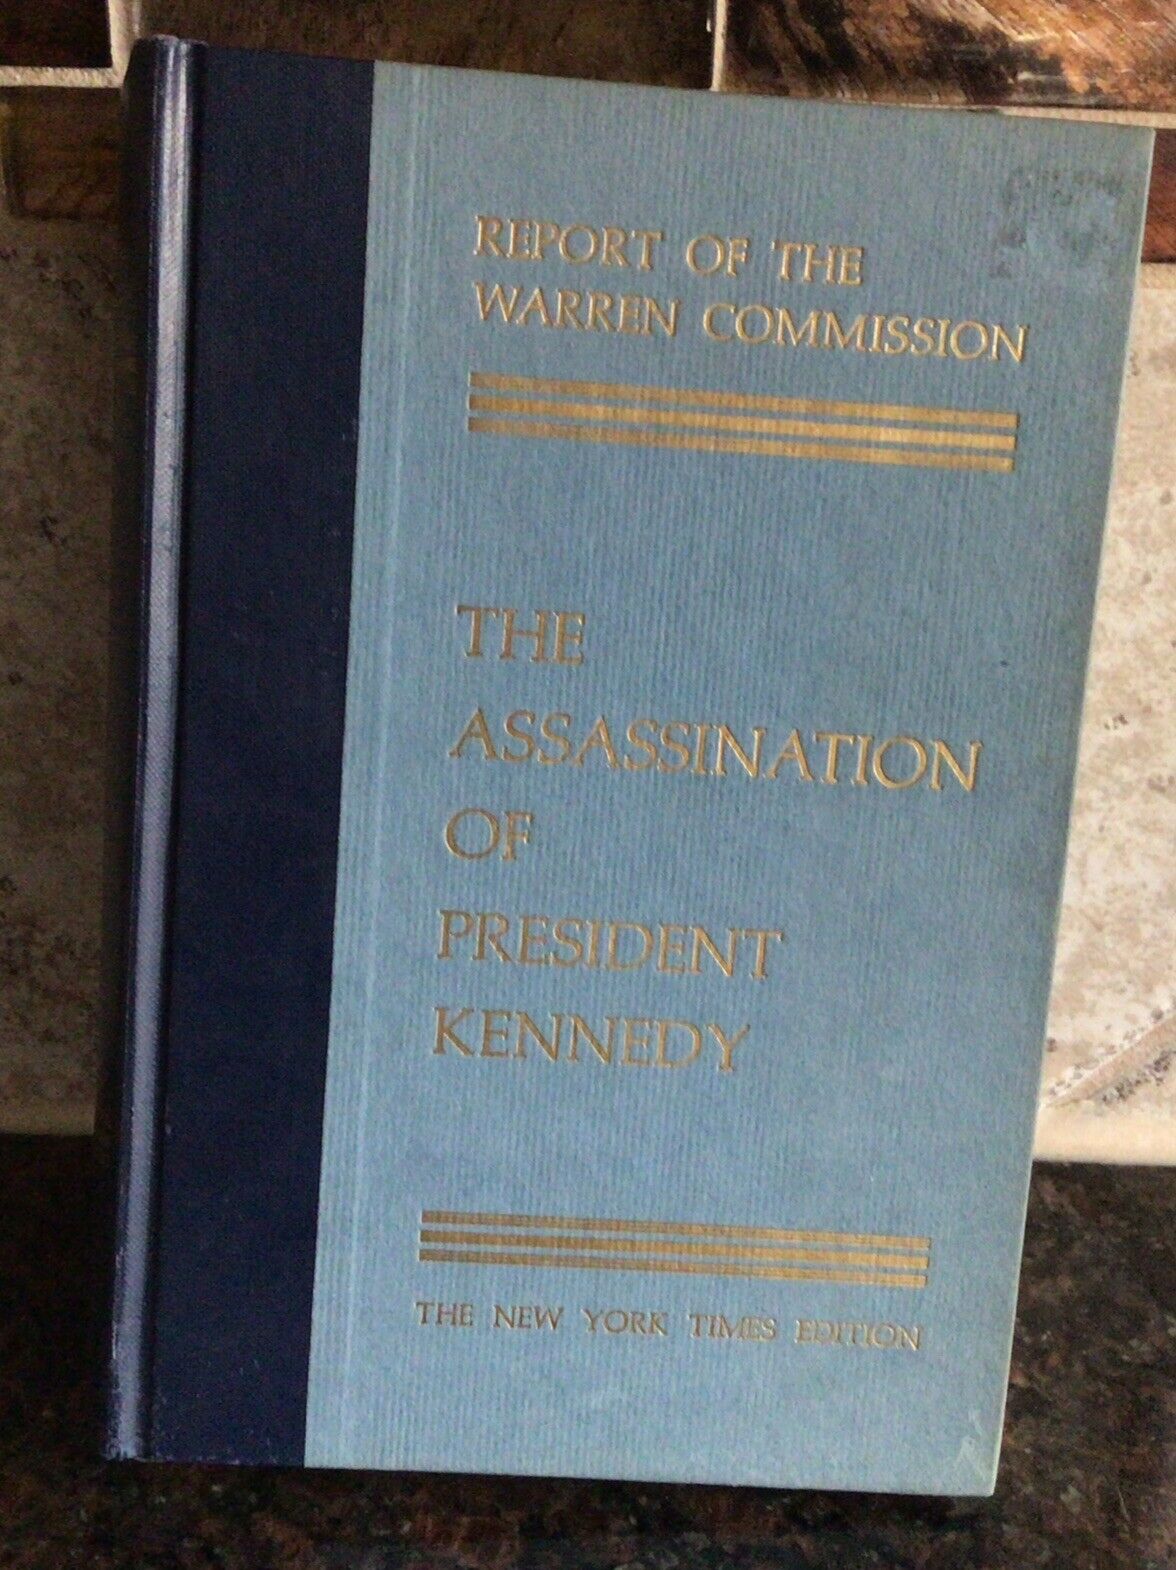 Report of the Warren Commission the Assasassination of President Kennedy